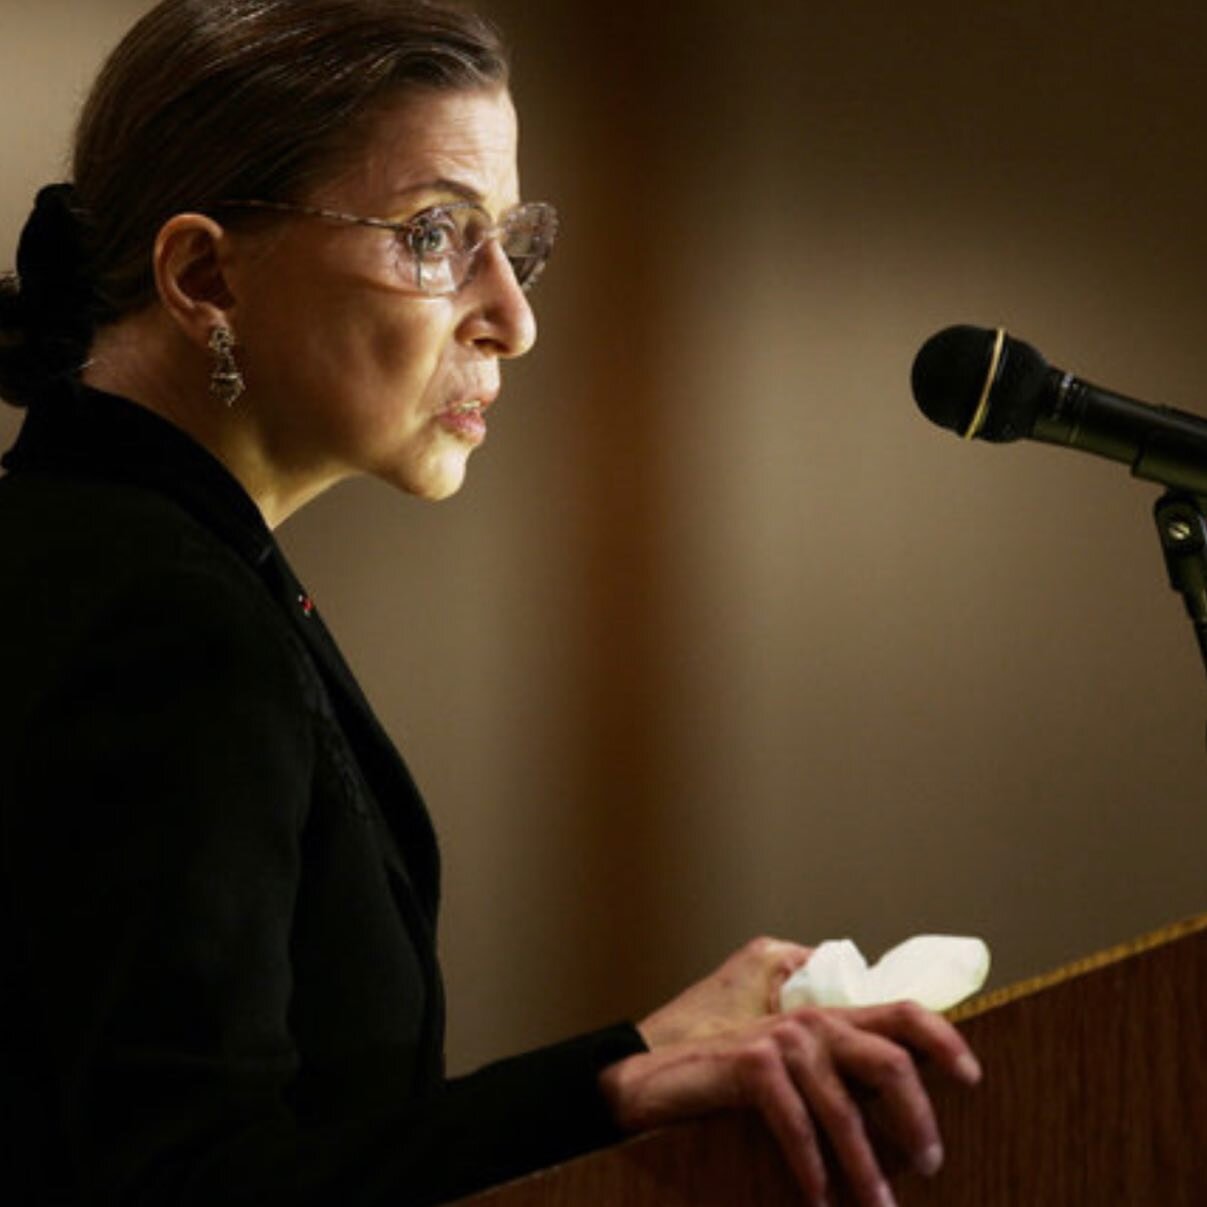 We have lost a champion for equality and justice . A true champion of the American people . #Rip #Justice Ruth Bader #Ginsburg, the demure firebrand who in her 80s became a legal, cultural and feminist icon, died Friday. 
NPR:
The Supreme Court annou